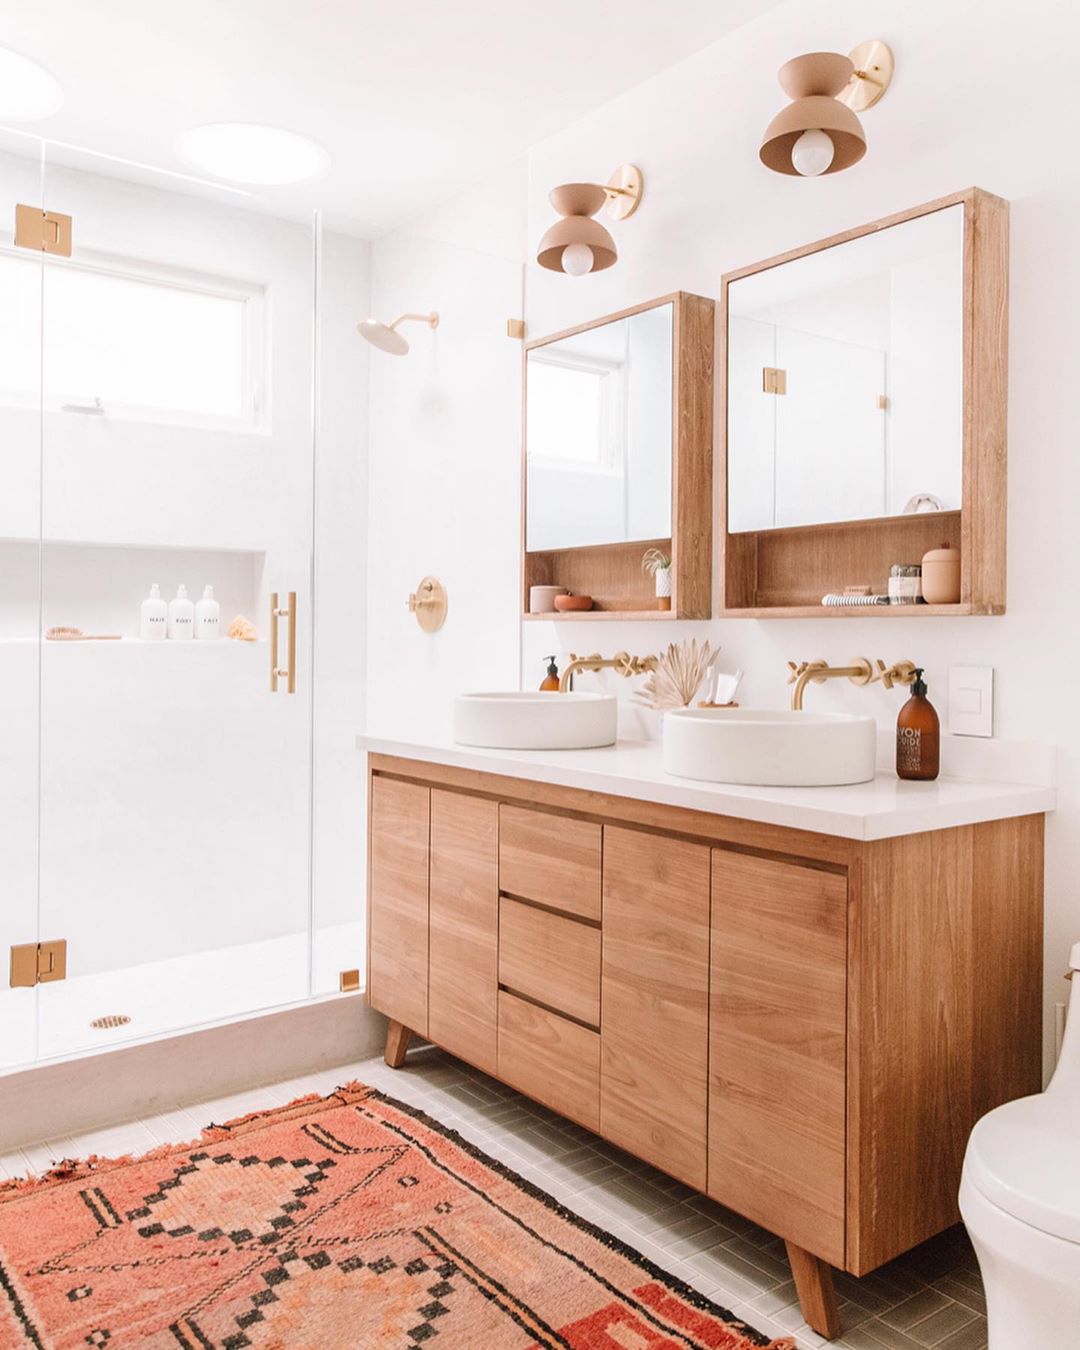 White bathroom with wood cabinet and orange rug. Photo by Instagram user @jeffmindell